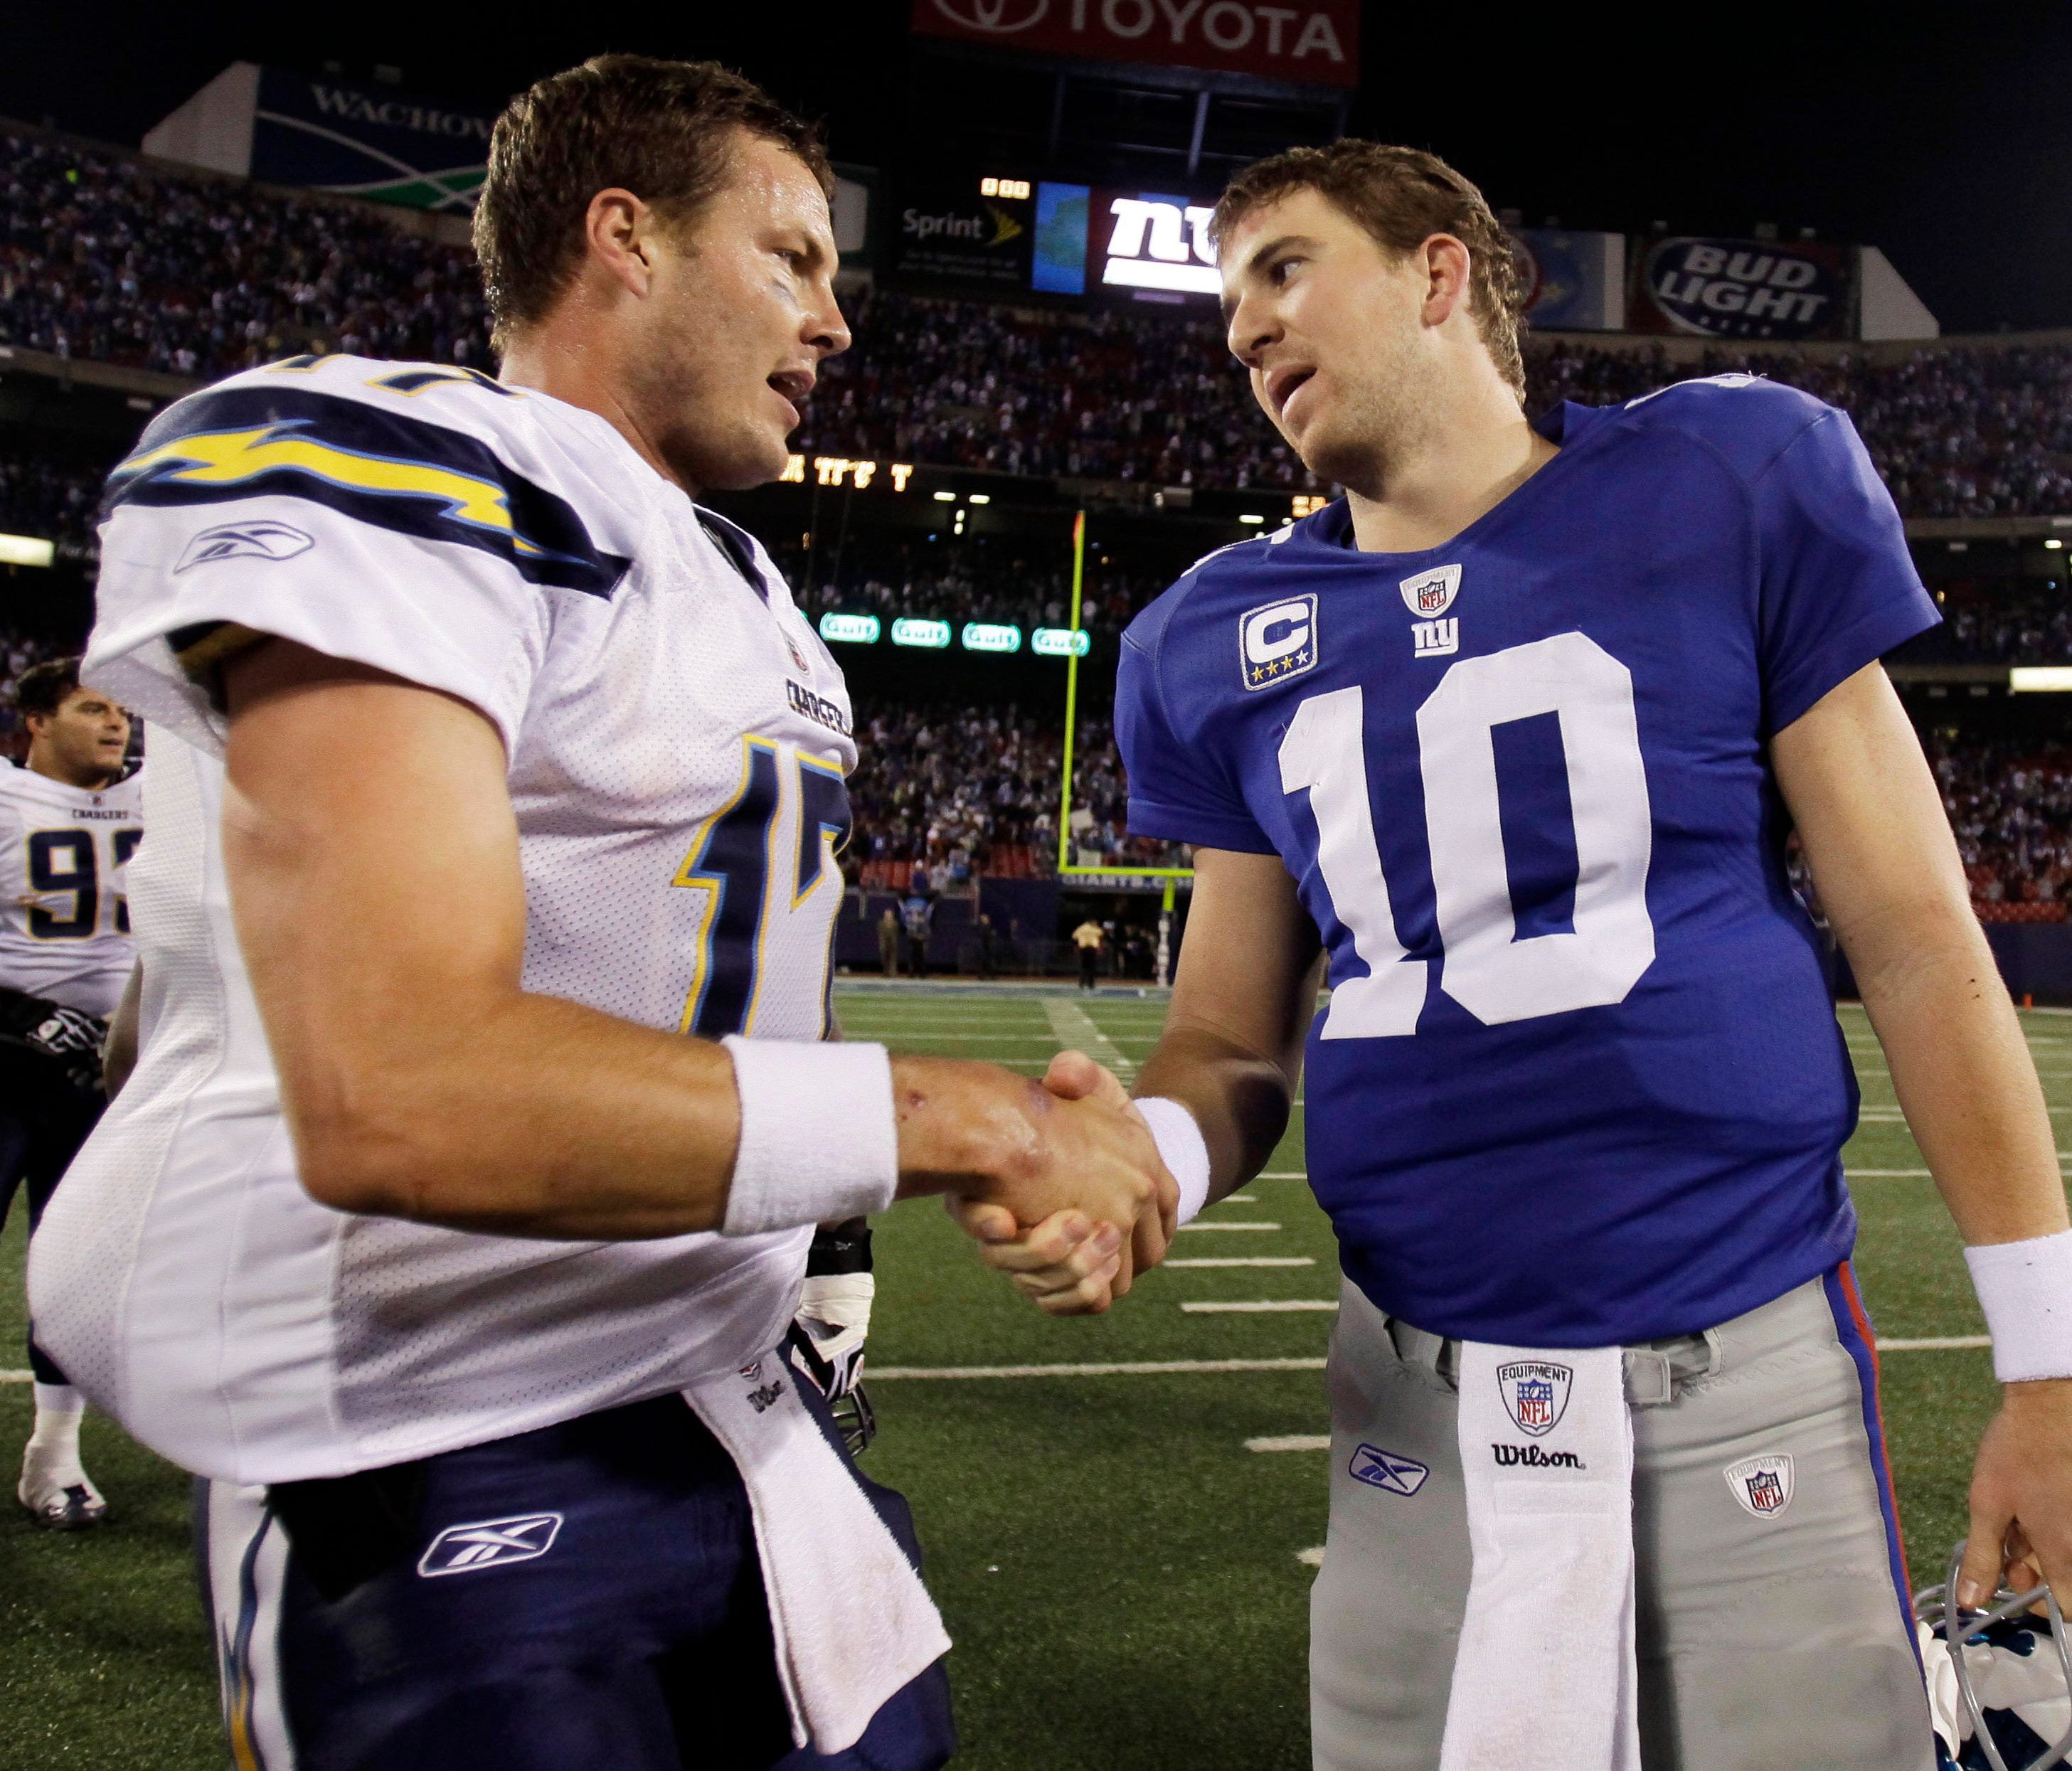 San Diego Chargers quarterback Philip Rivers, left, shakes hands with New York Giants quarterback Eli Manning after an NFL football game. Rivers takes over the quarterback consecutive starts streak now what Manning is being benched.